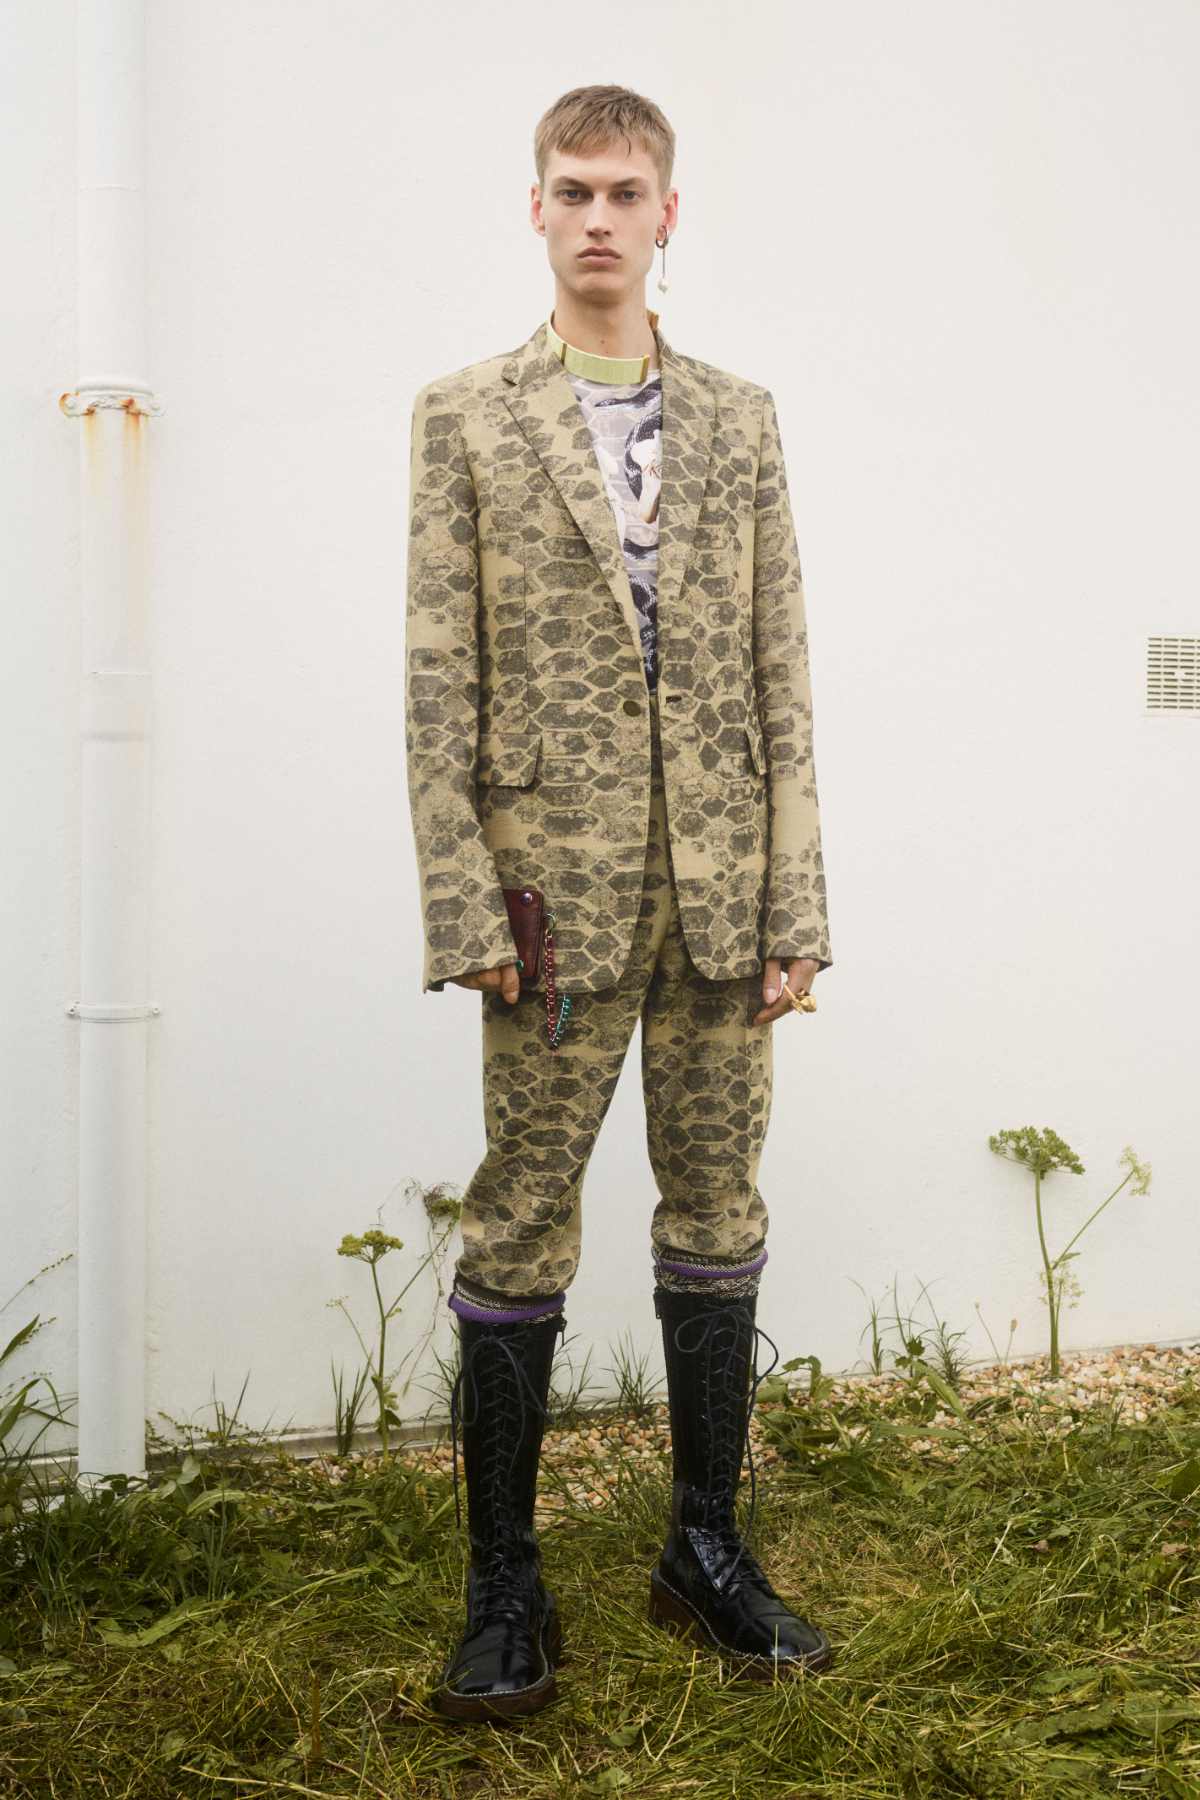 Acne Studios Presents Its New Men’s Spring/Summer 2022 Collection